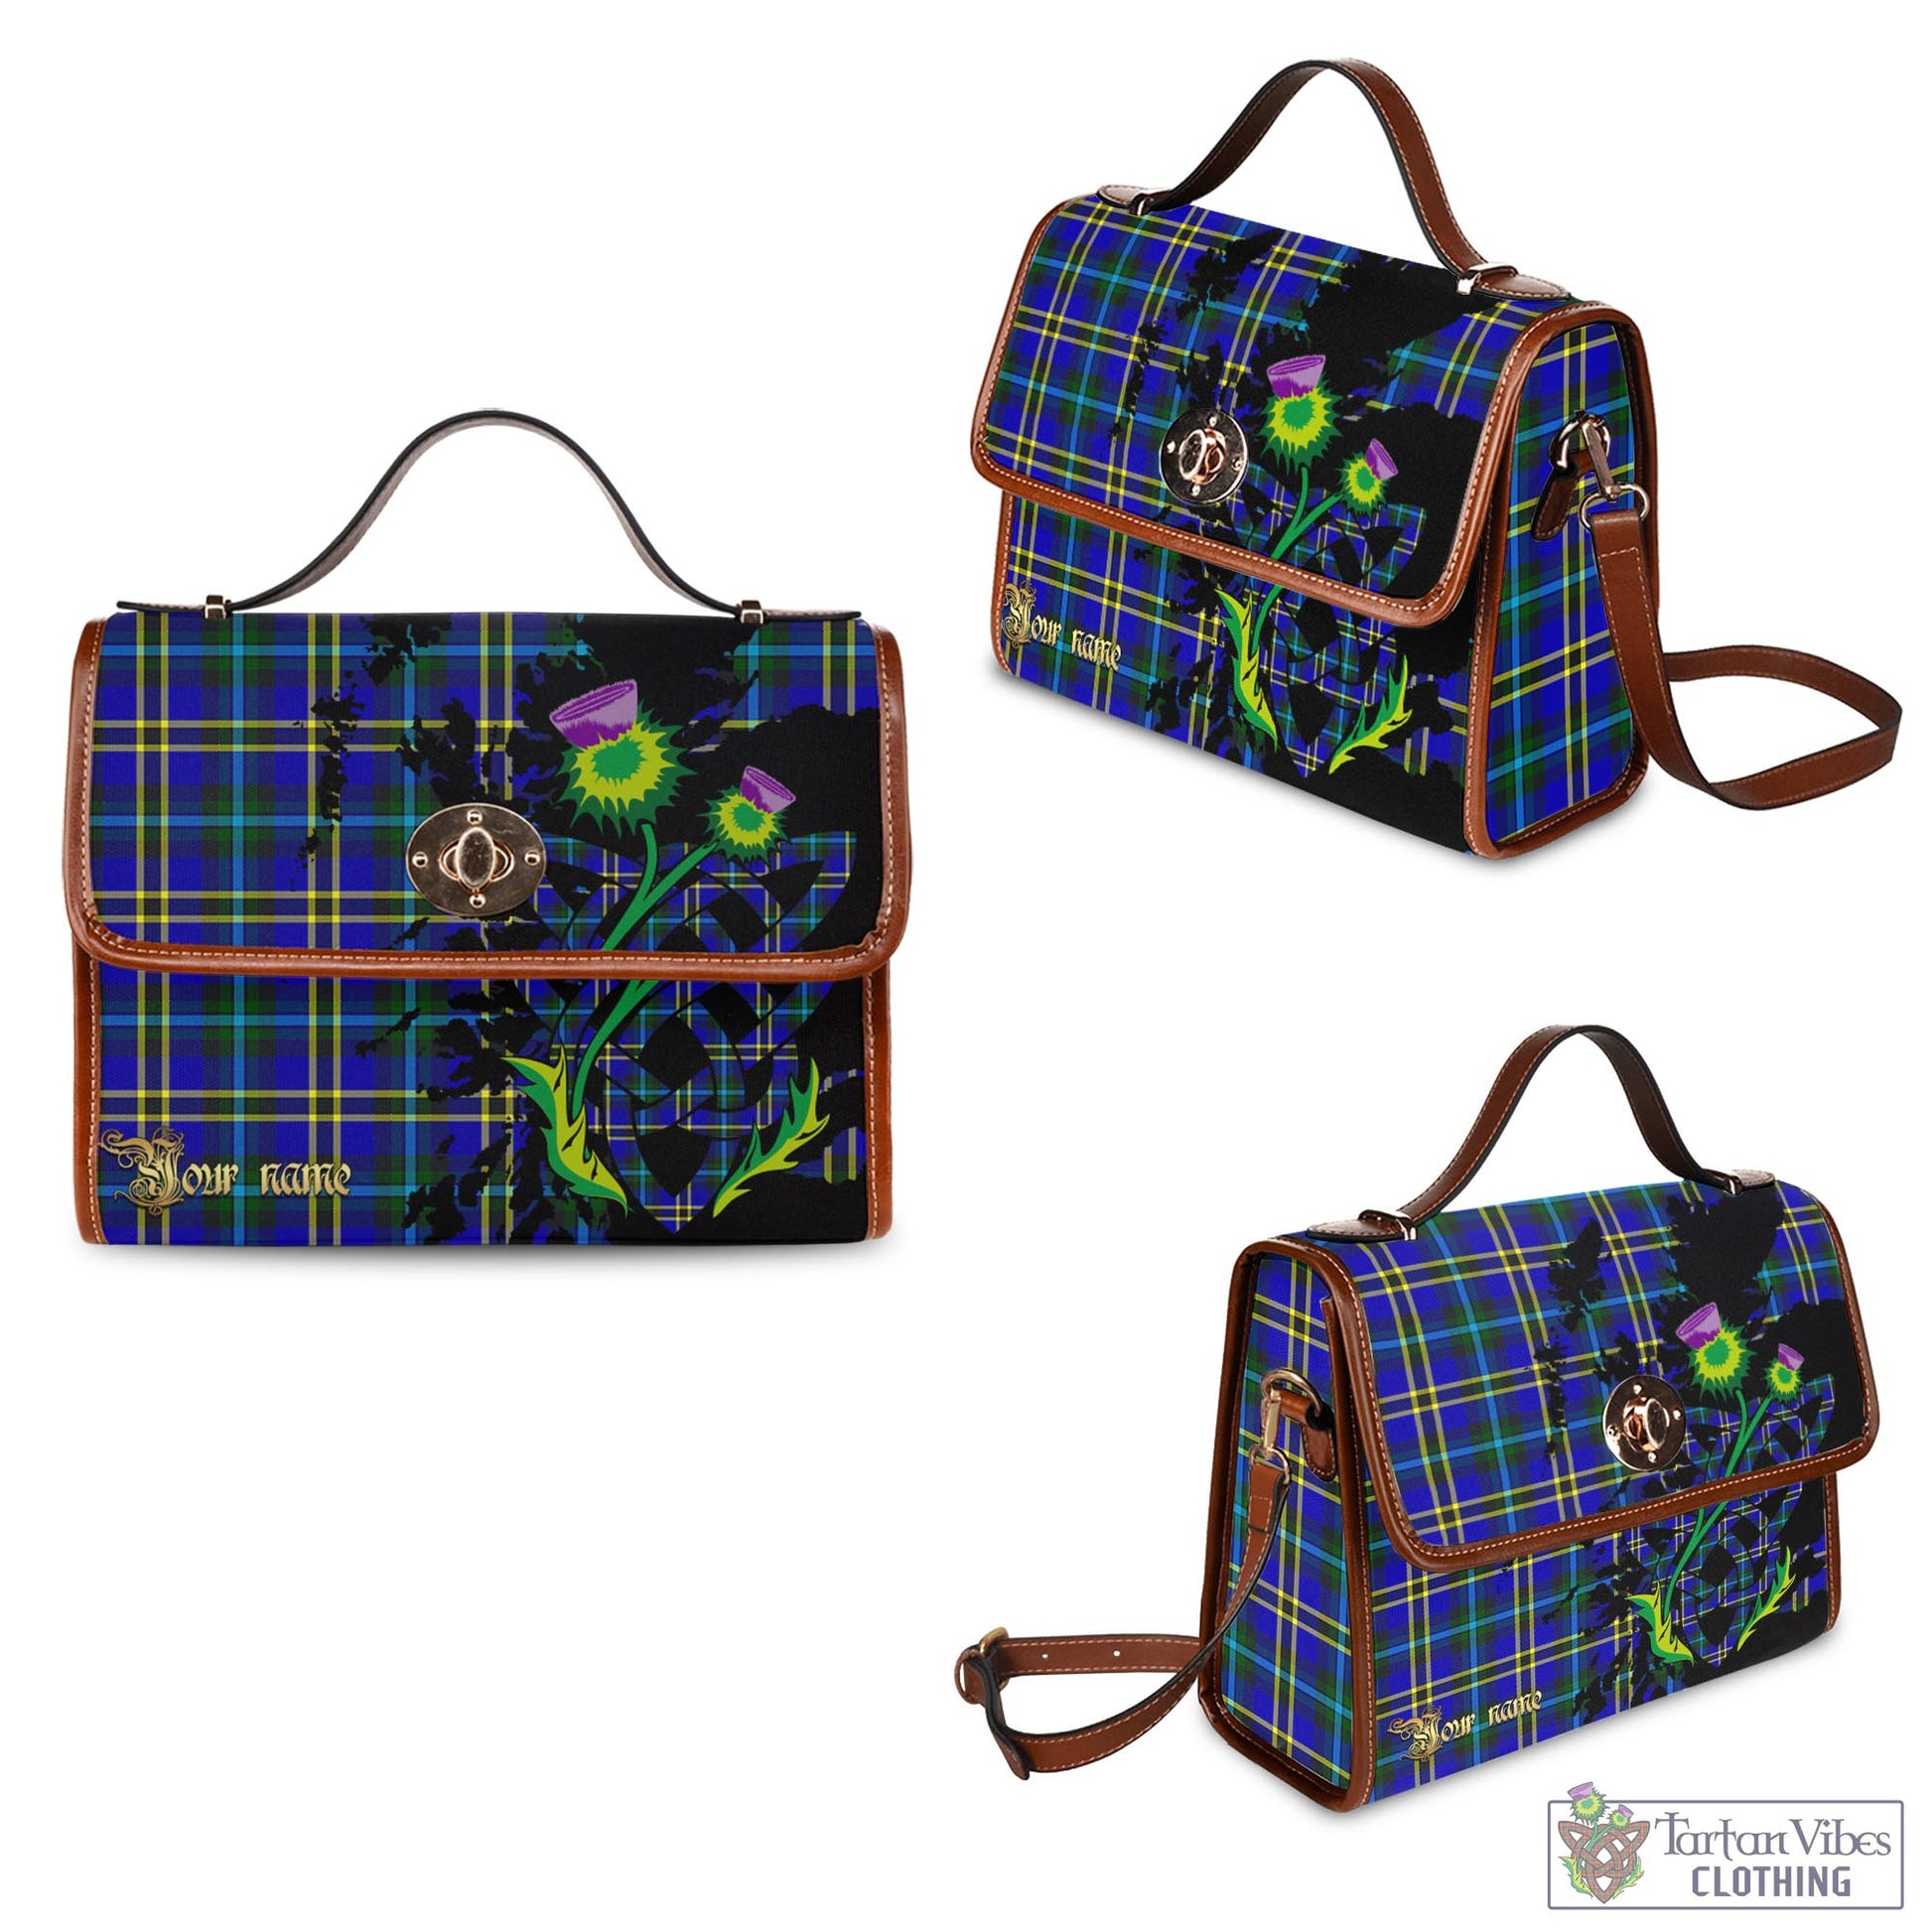 Tartan Vibes Clothing Weir Modern Tartan Waterproof Canvas Bag with Scotland Map and Thistle Celtic Accents